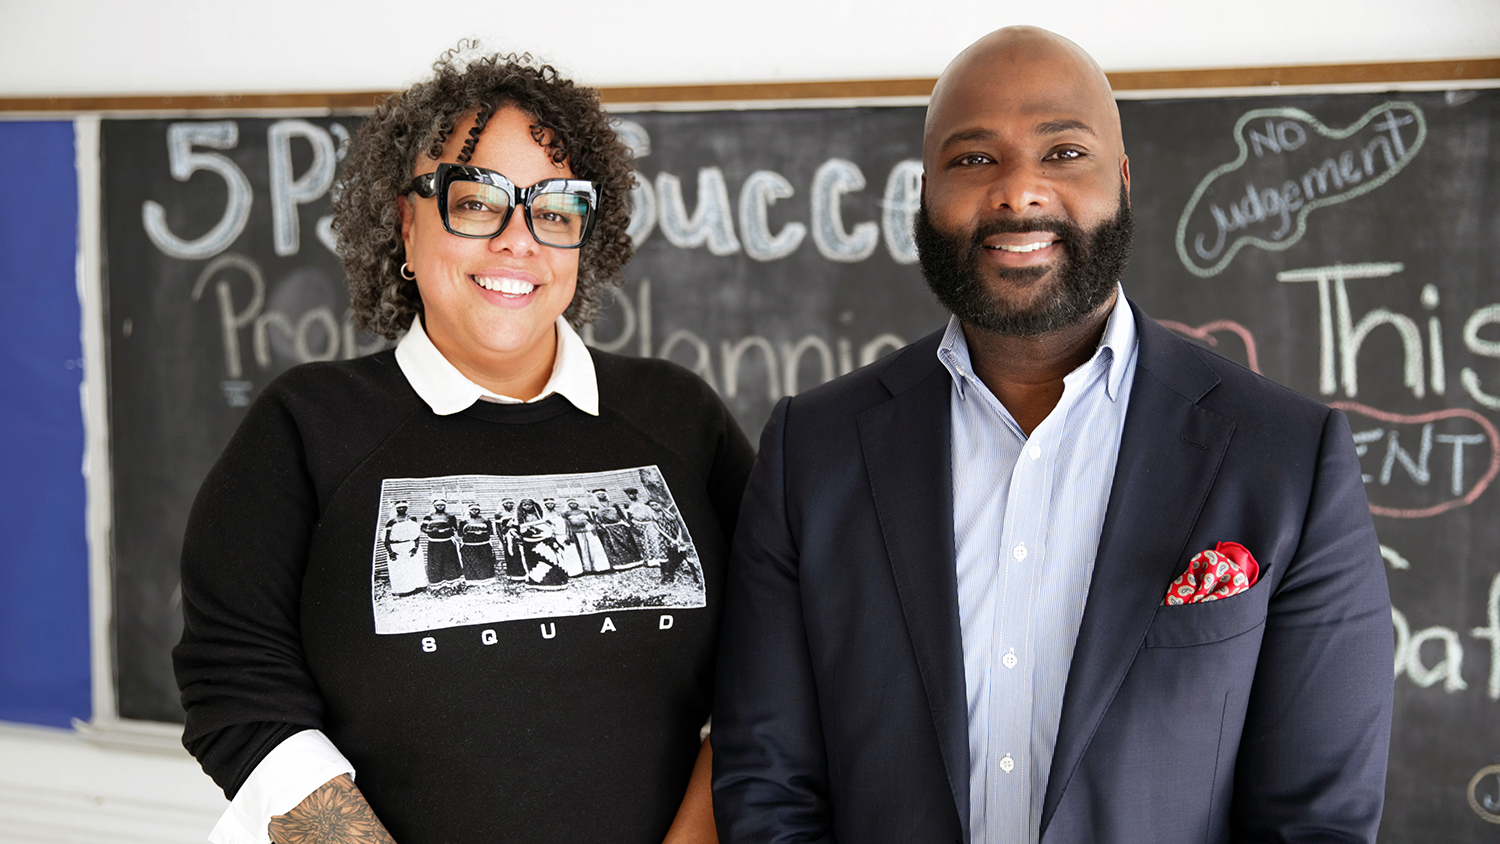 RICH co-founder Danielle Battle, wearing her trademark stylish eyeglasses and a dark sweatshirt with a photo of people and the word “Squad” on it, poses for a photo with Frederick Riley, executive director, Weave: The Social Fabric Project, who is in an open-collared shirt and a navy blazer. They are standing in front of a blackboard filled with inspirational phrases at RICH’s headquarters in Baltimore.  